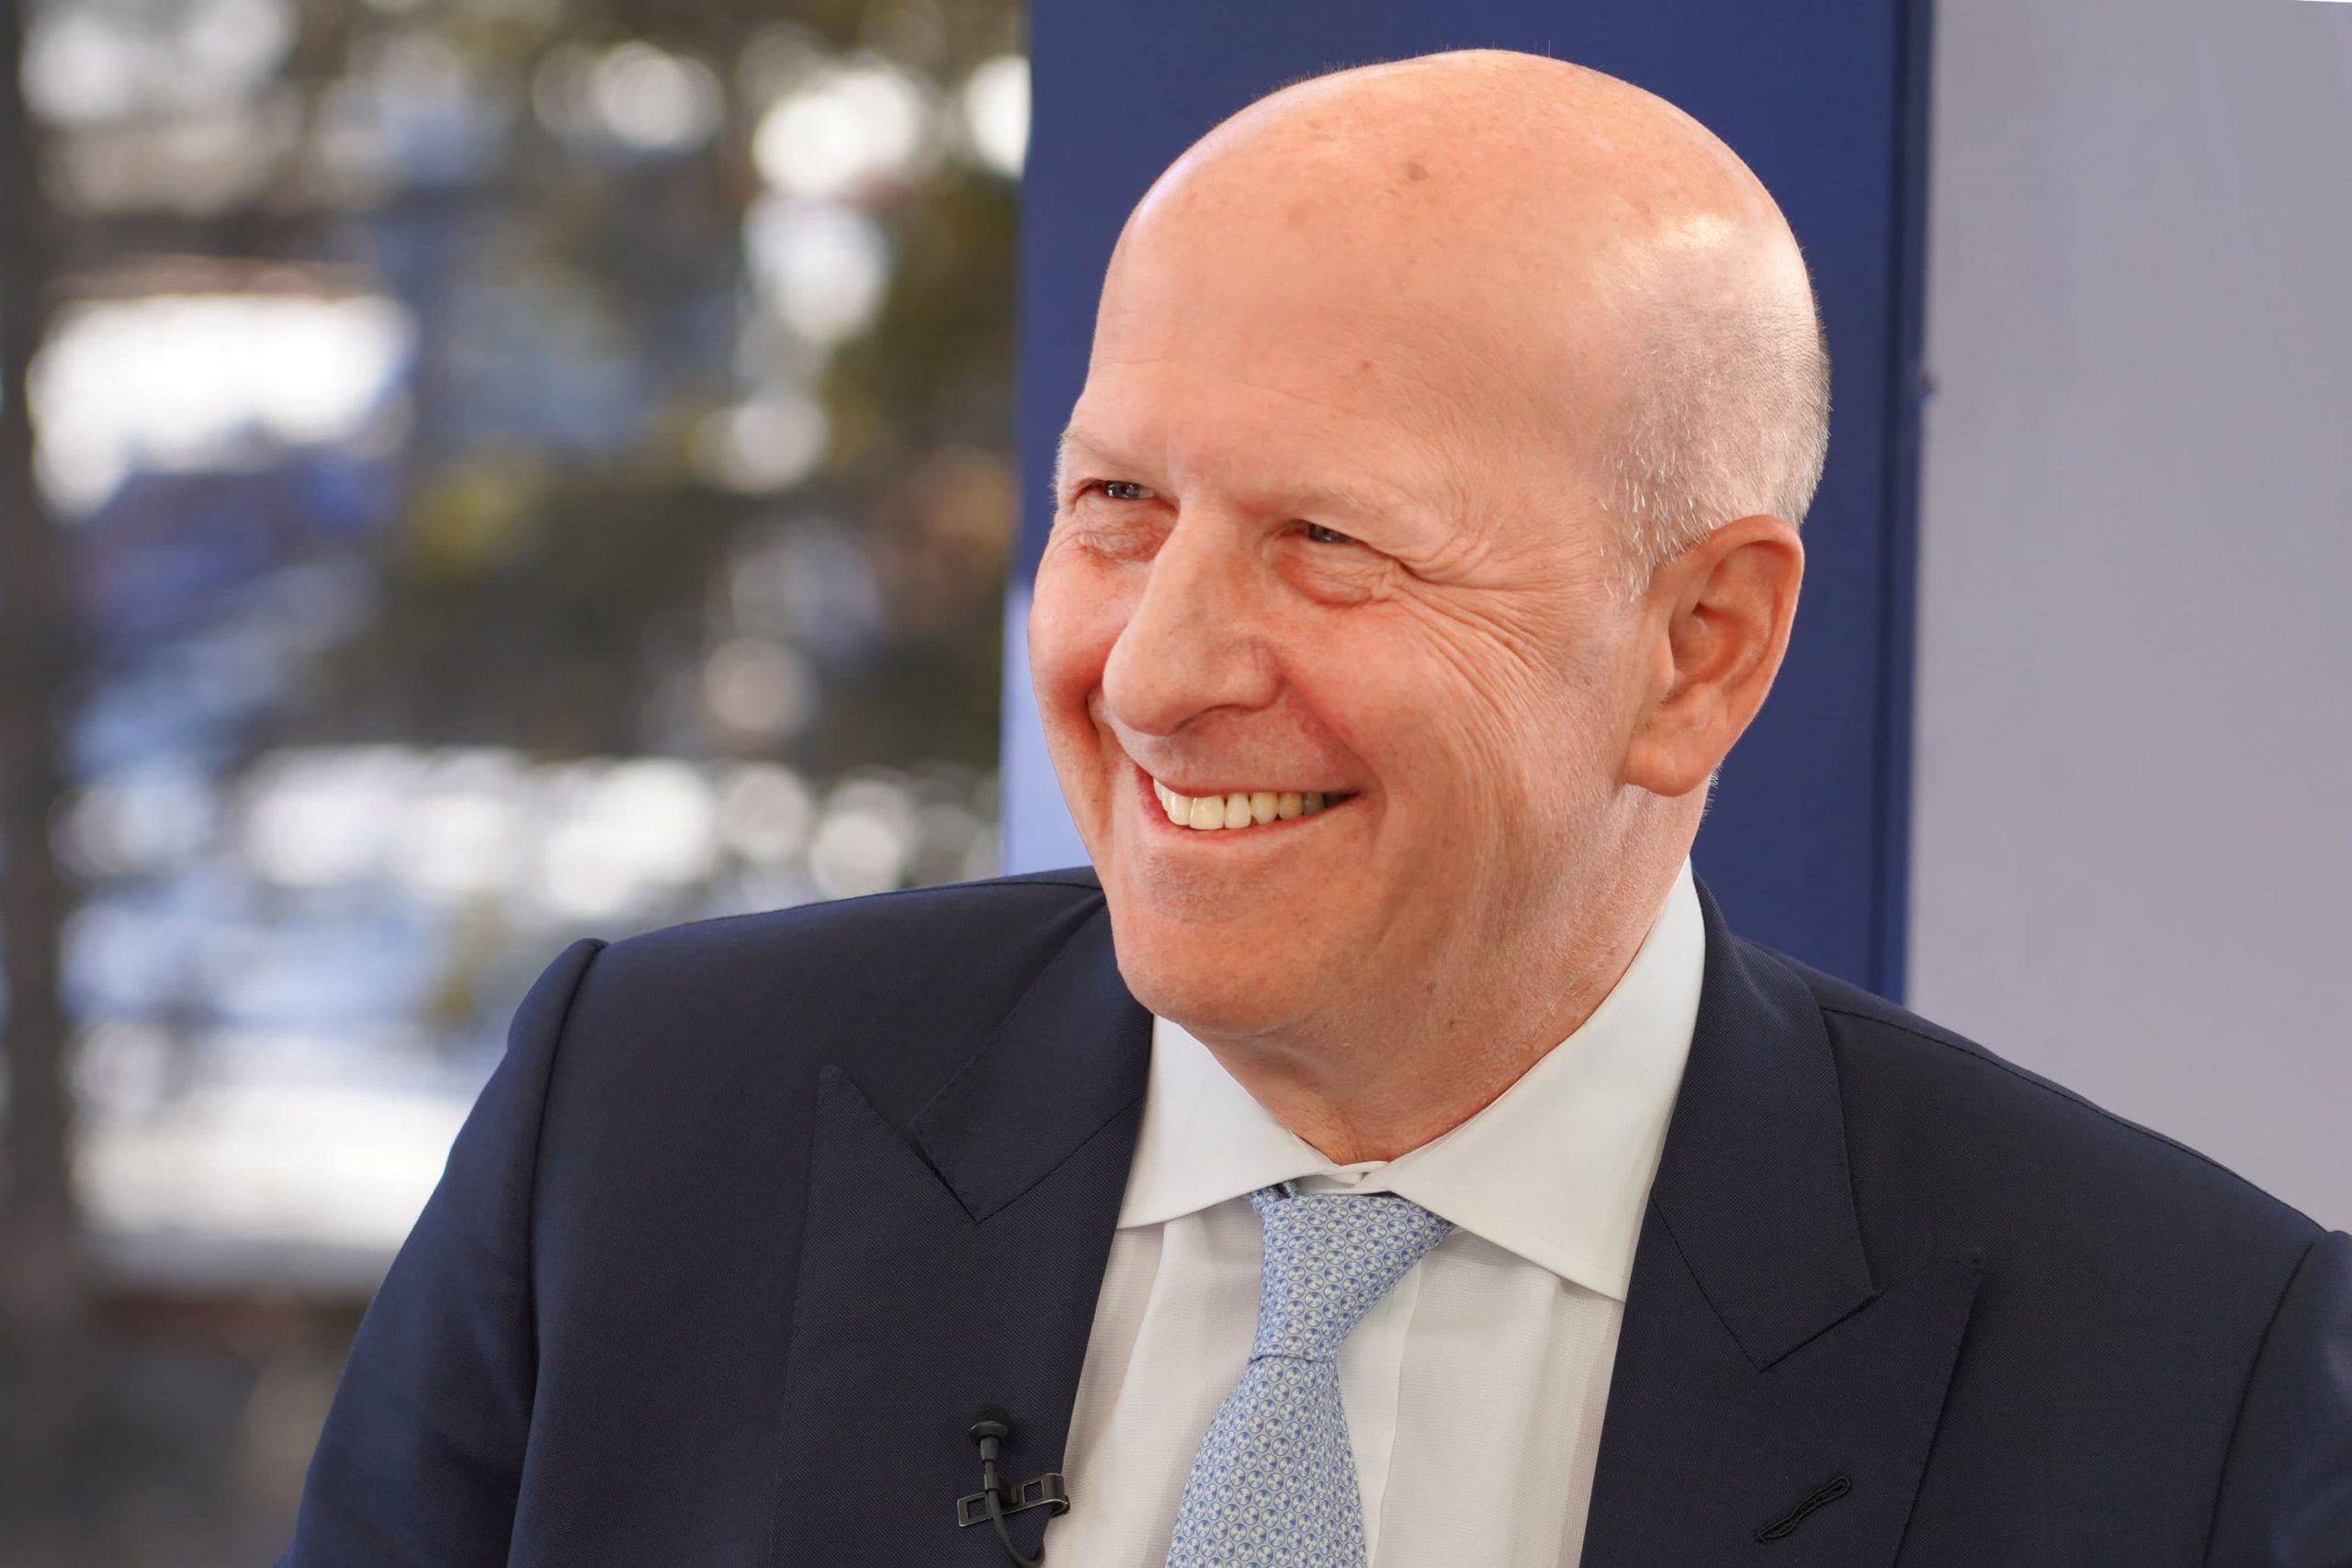 Goldman Sachs CEO David Solomon mentioned that 90% of small companies have exhausted PPP funds